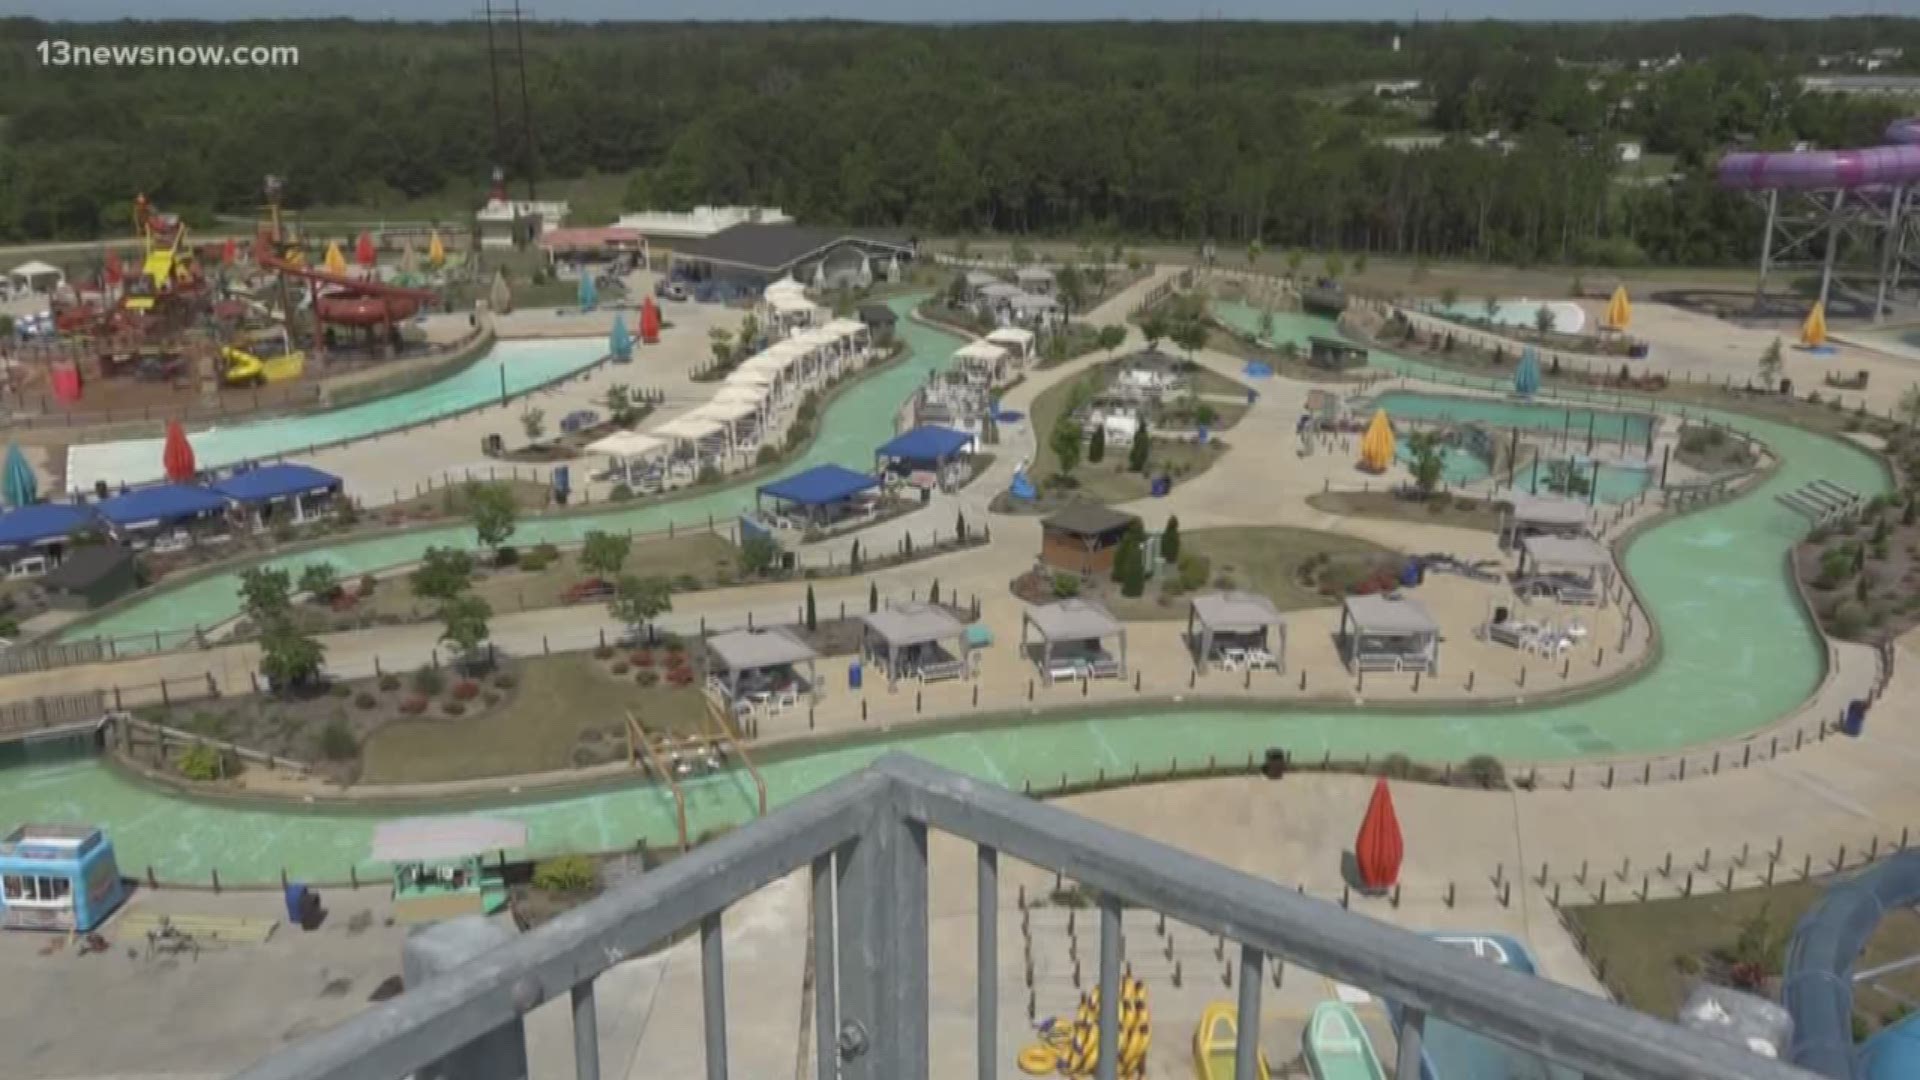 13News Now Rachael Peart takes a look at the H2OBX Waterpark in Currituck County that's ready for the summer!